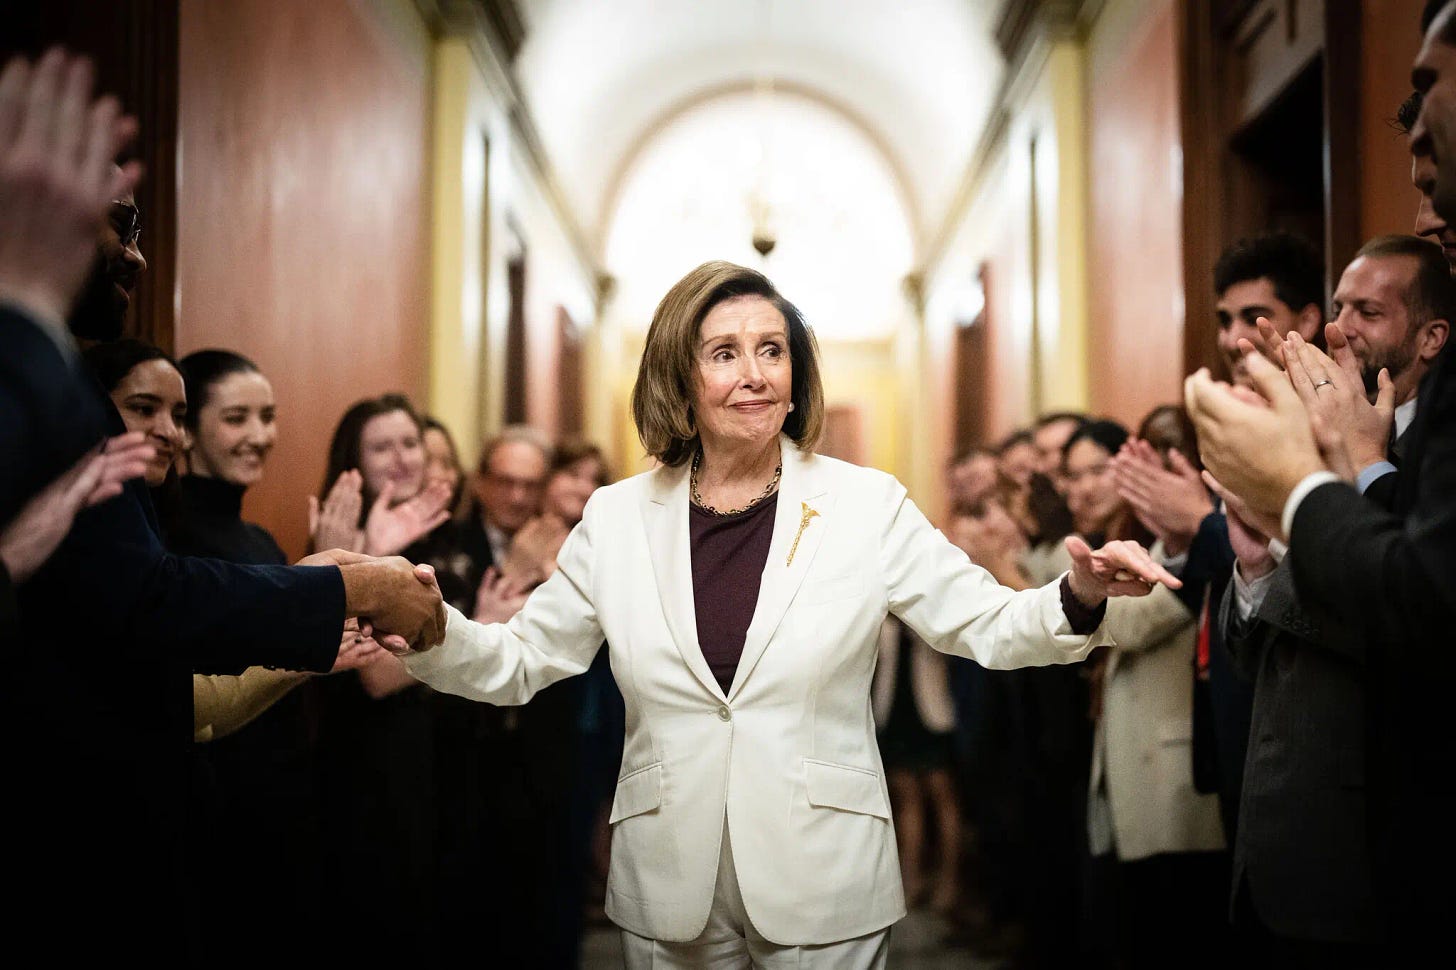 Nancy Pelosi, in a white pant suit, walks down a long hallway in the US Capitol, both of her arms outstretched to accept the handshakes and applause of the people lining the hallway. The hallway is filled with them, and the clap and smile as Pelosi walks, a wry smile on her face.